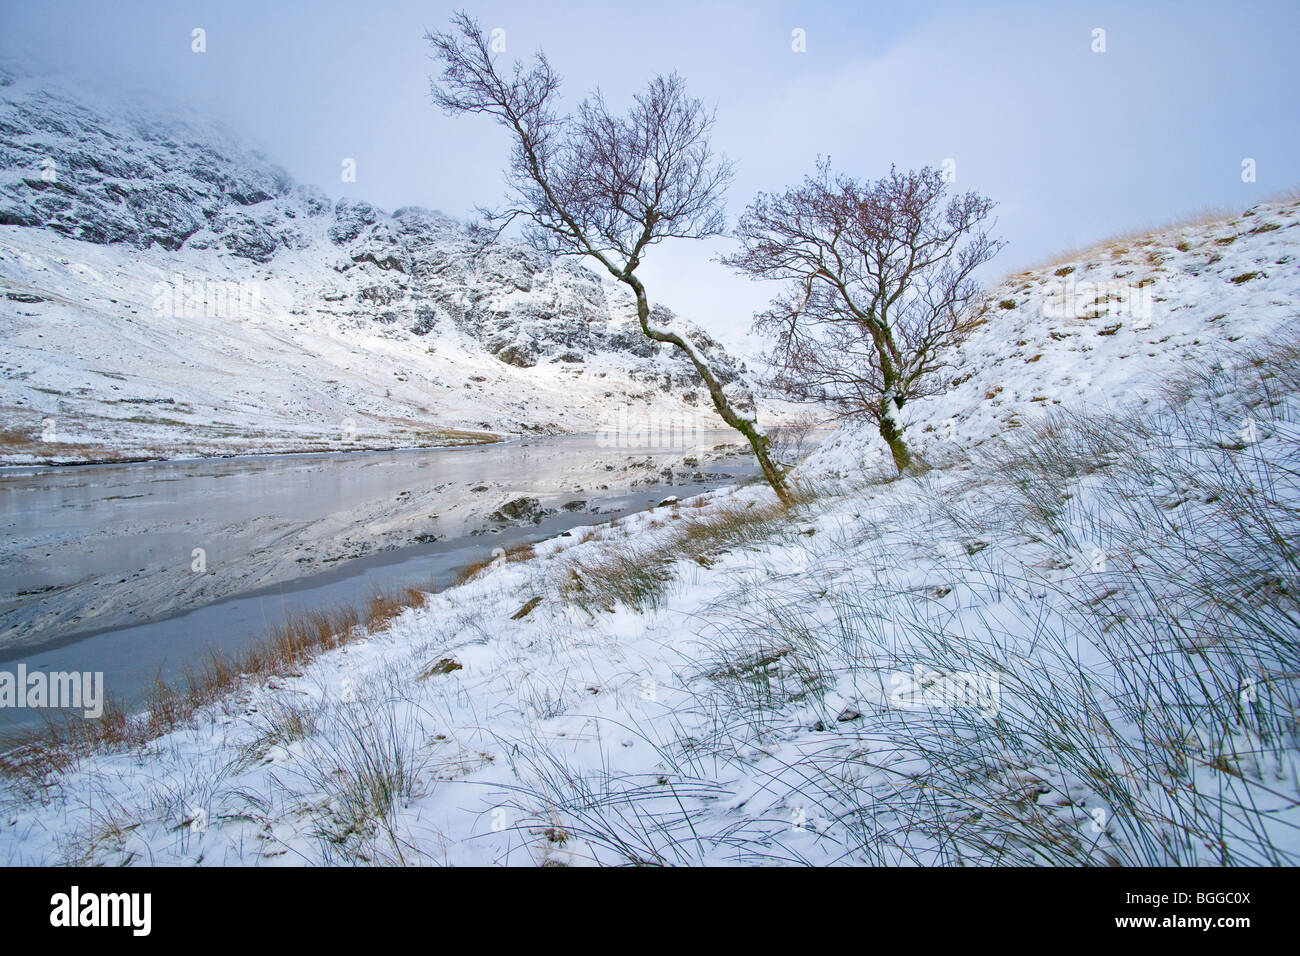 Snow and ice, Loch Restil, Rest and be thankful, Arrochar, Argyll, Scotland, December 2009 Stock Photo